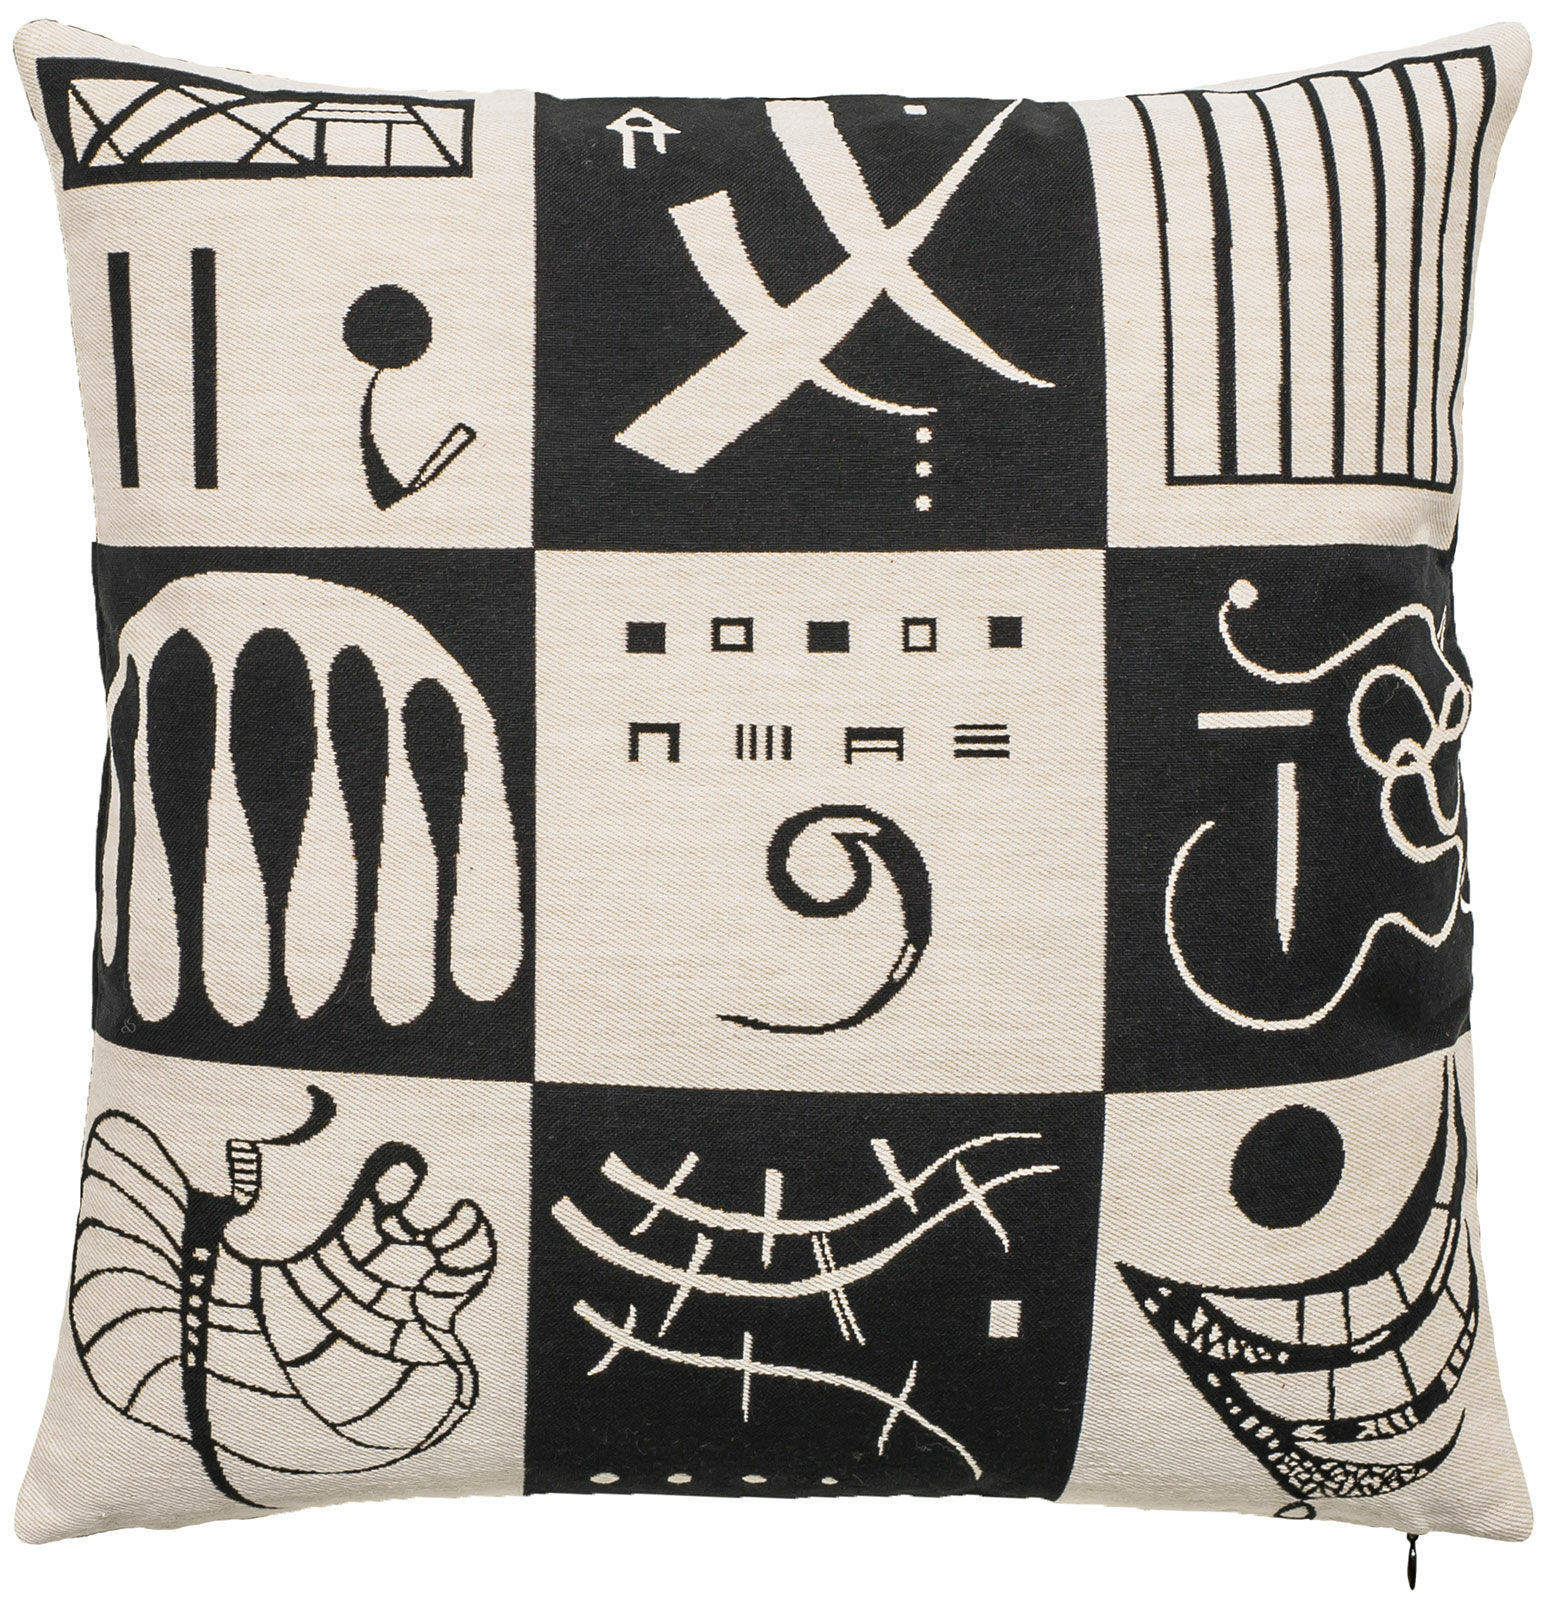 Cushion cover "Trente III" by Wassily Kandinsky